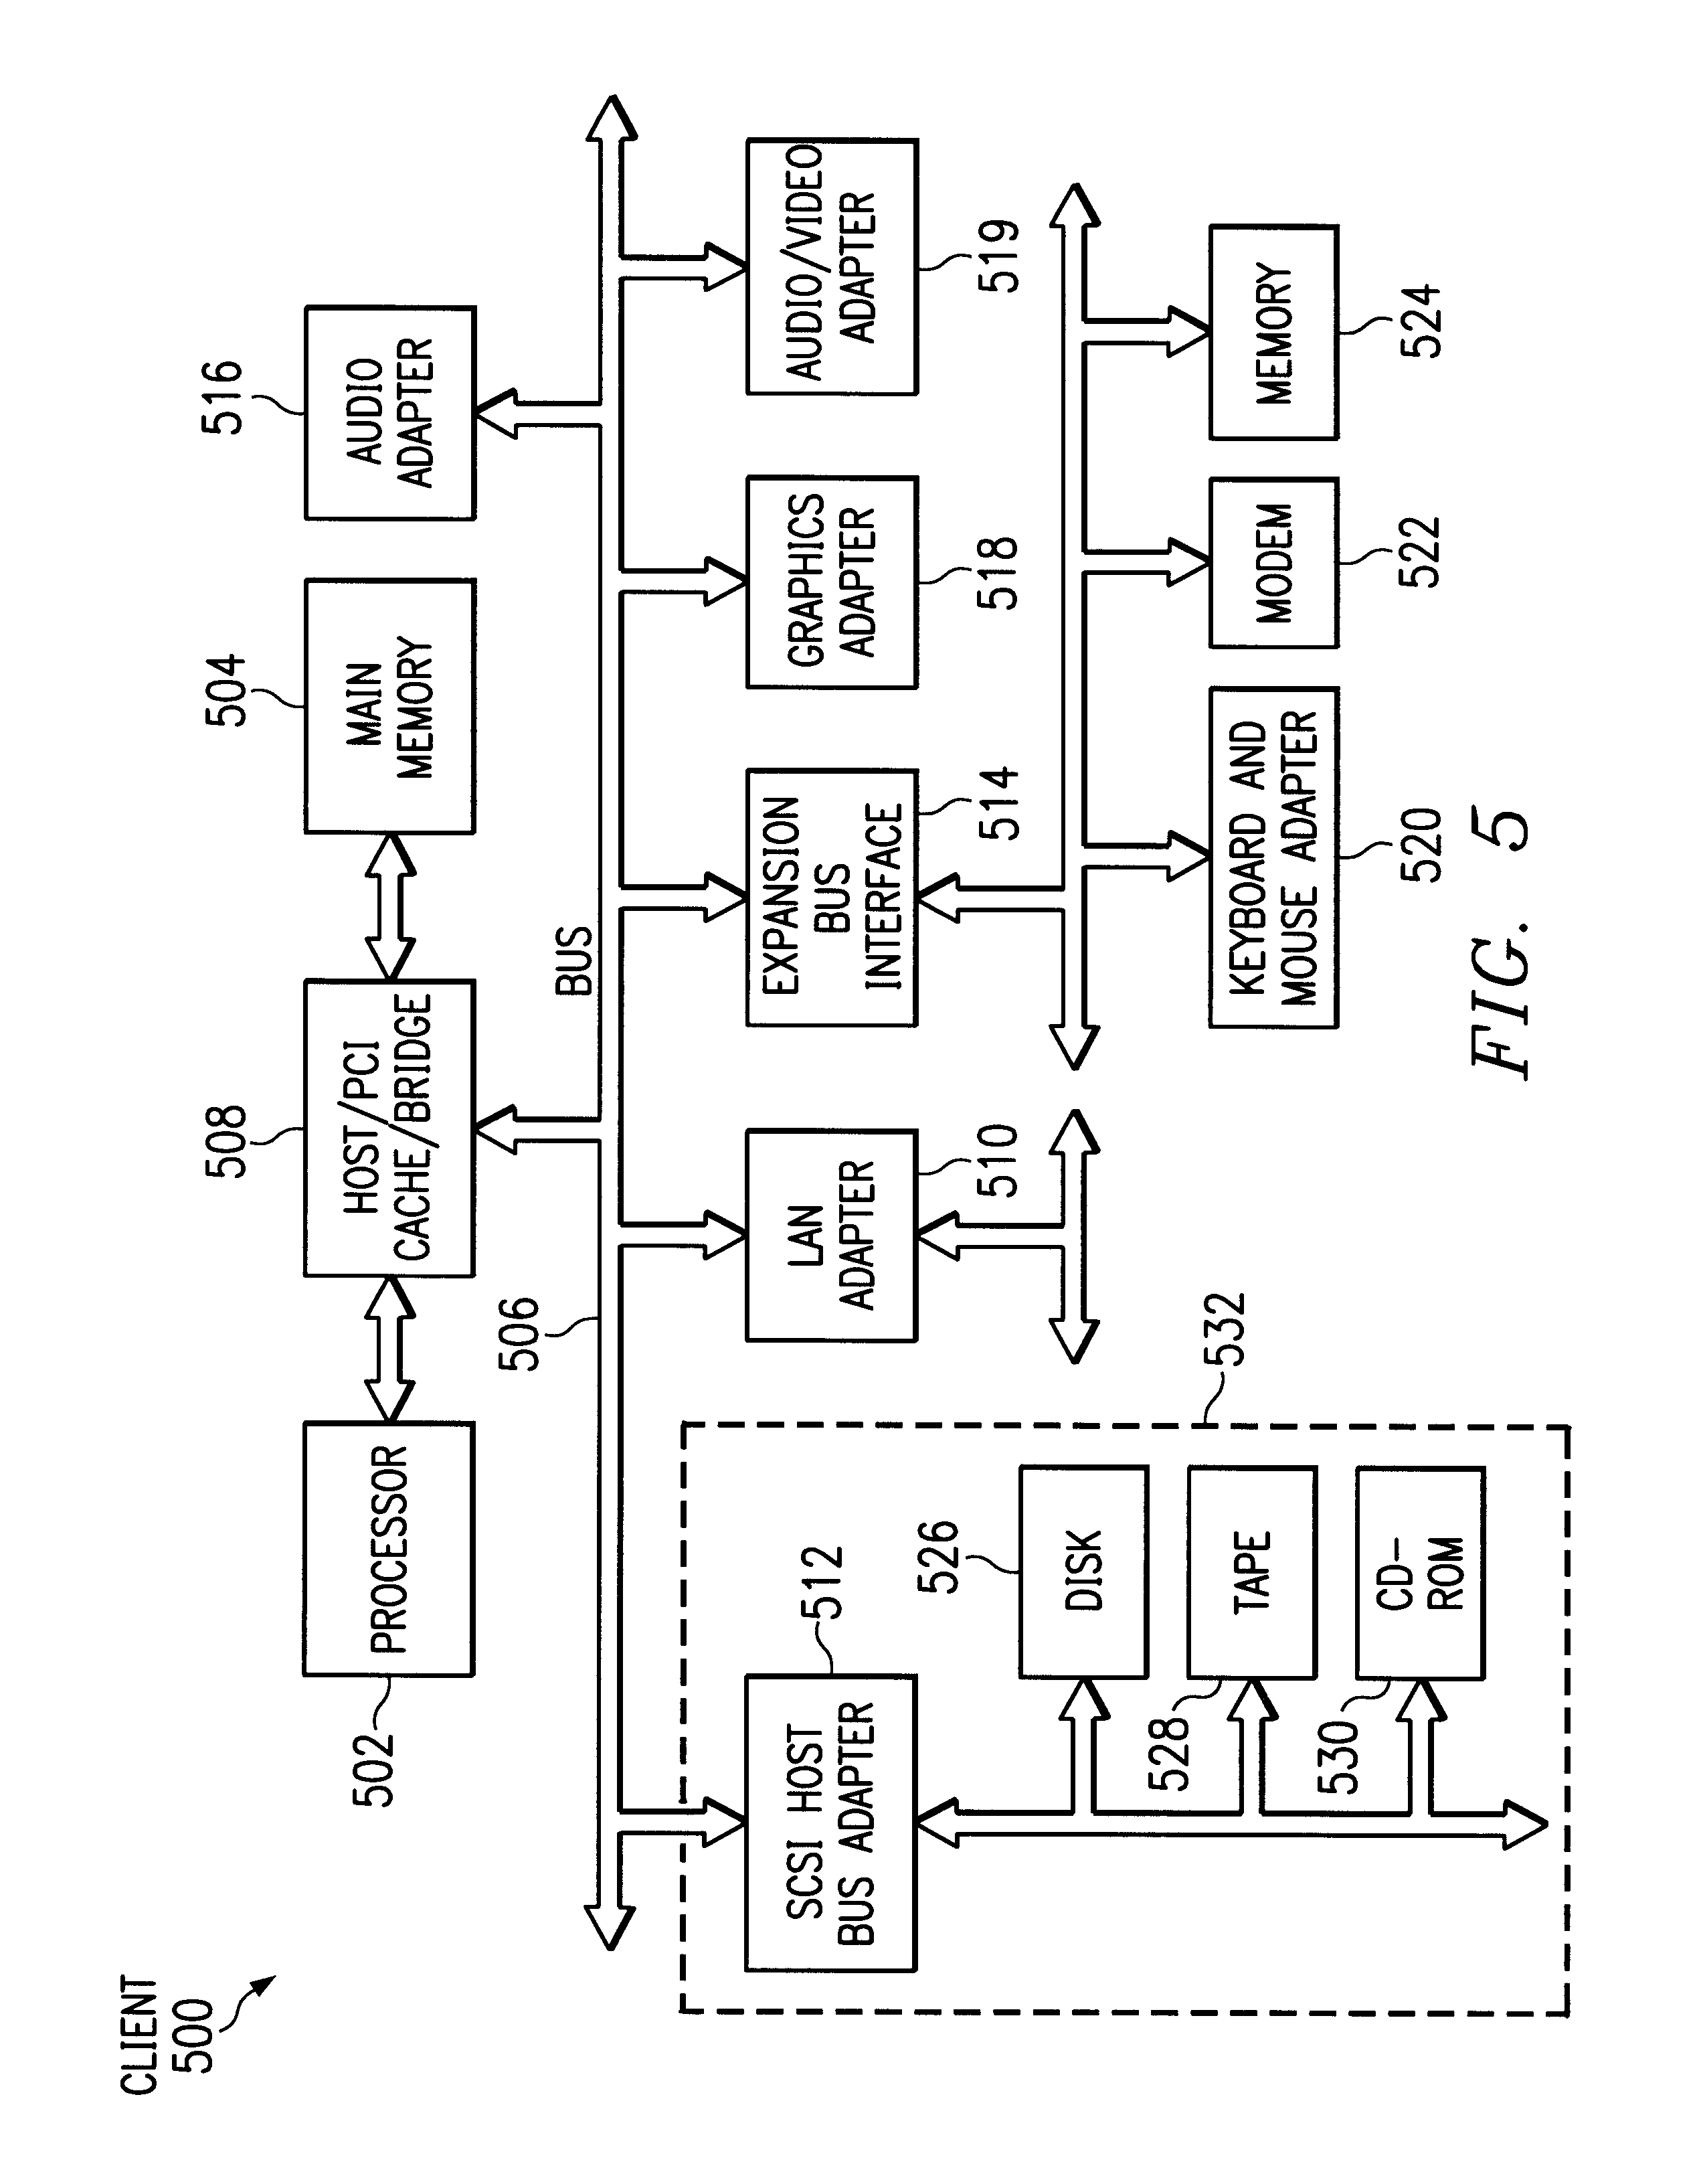 Method and apparatus for updating a window identification buffer in a data processing system